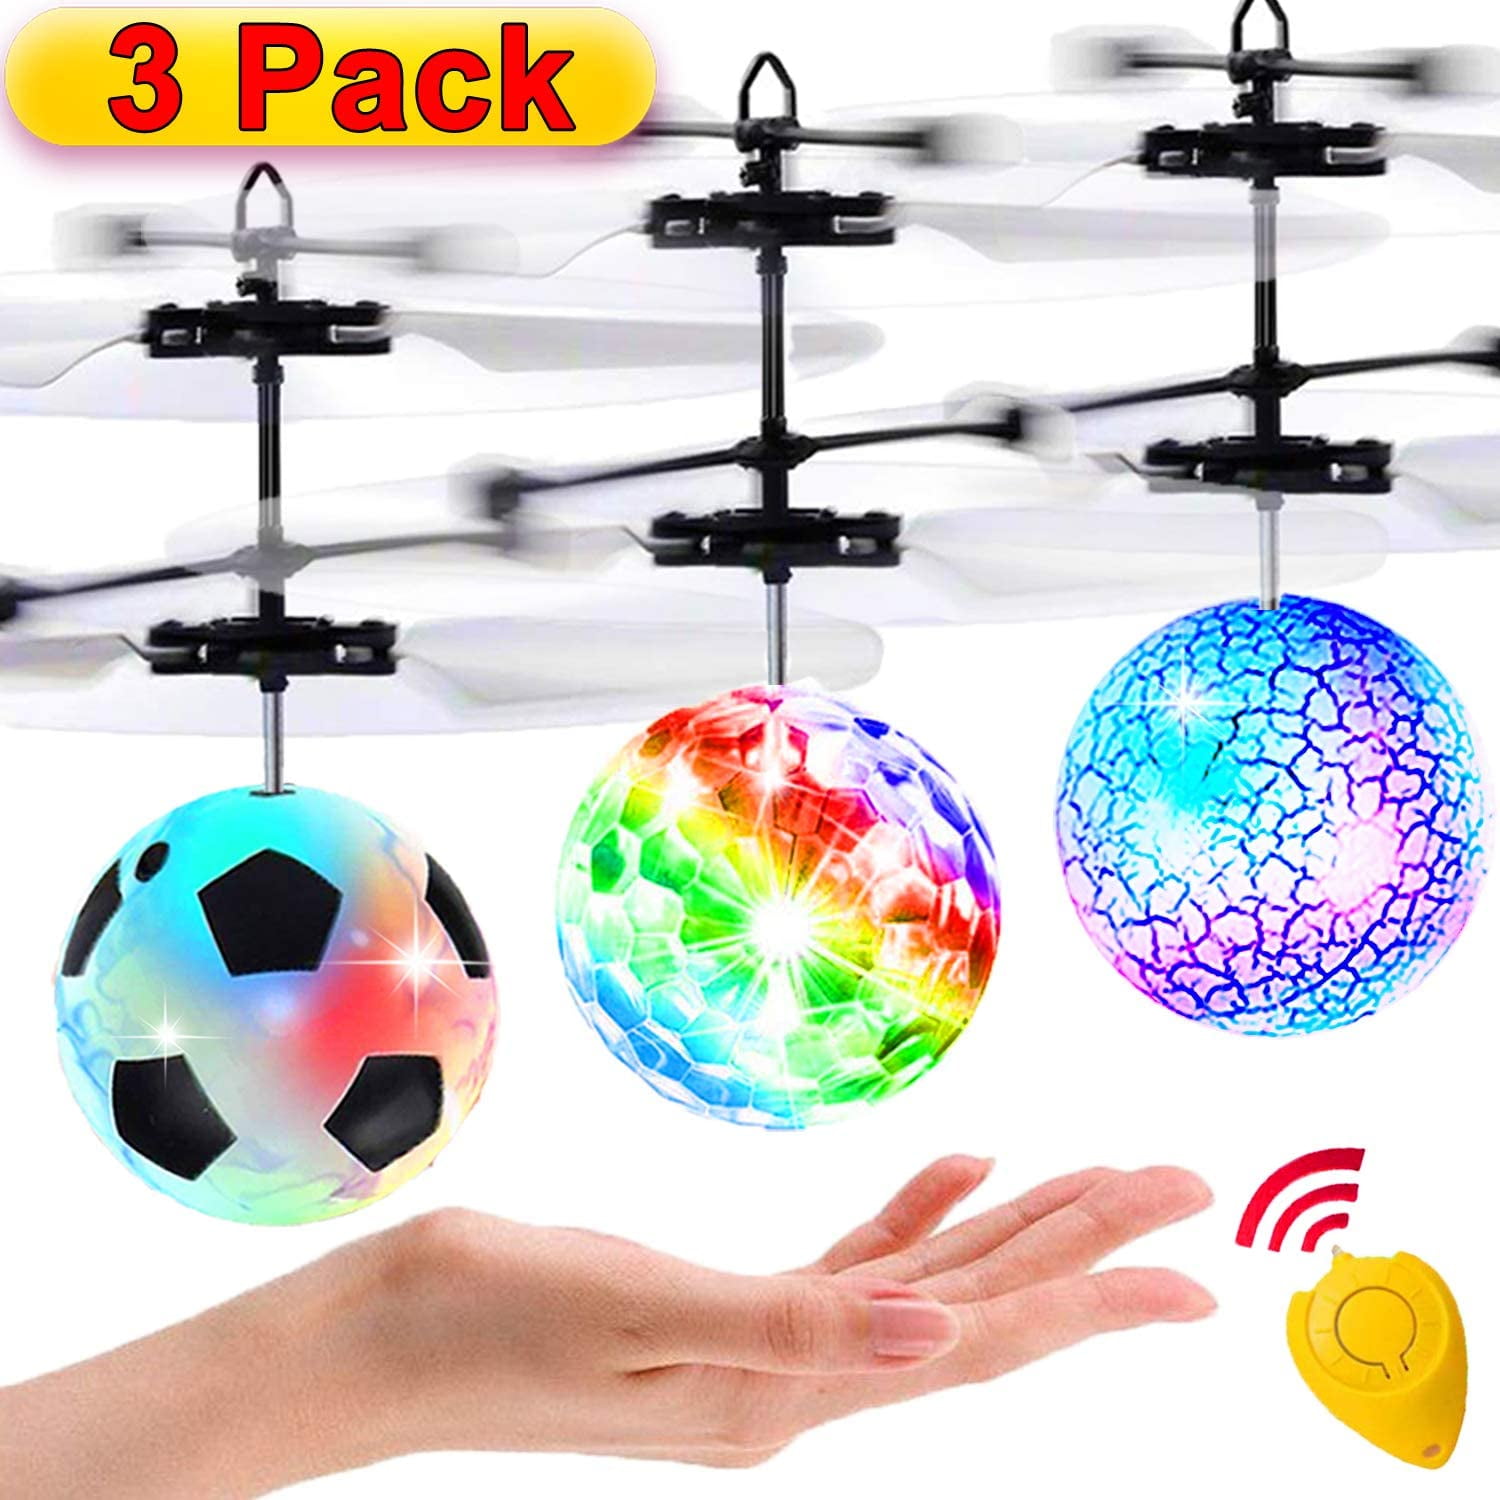 RC Toy for Kids Boys Girls Gifts Rechargeable Light Up Ball Drone Infrared Induction Helicopter with Remote Controller for Indoor and Outdoor Games Fanxis Flying Ball Toys 